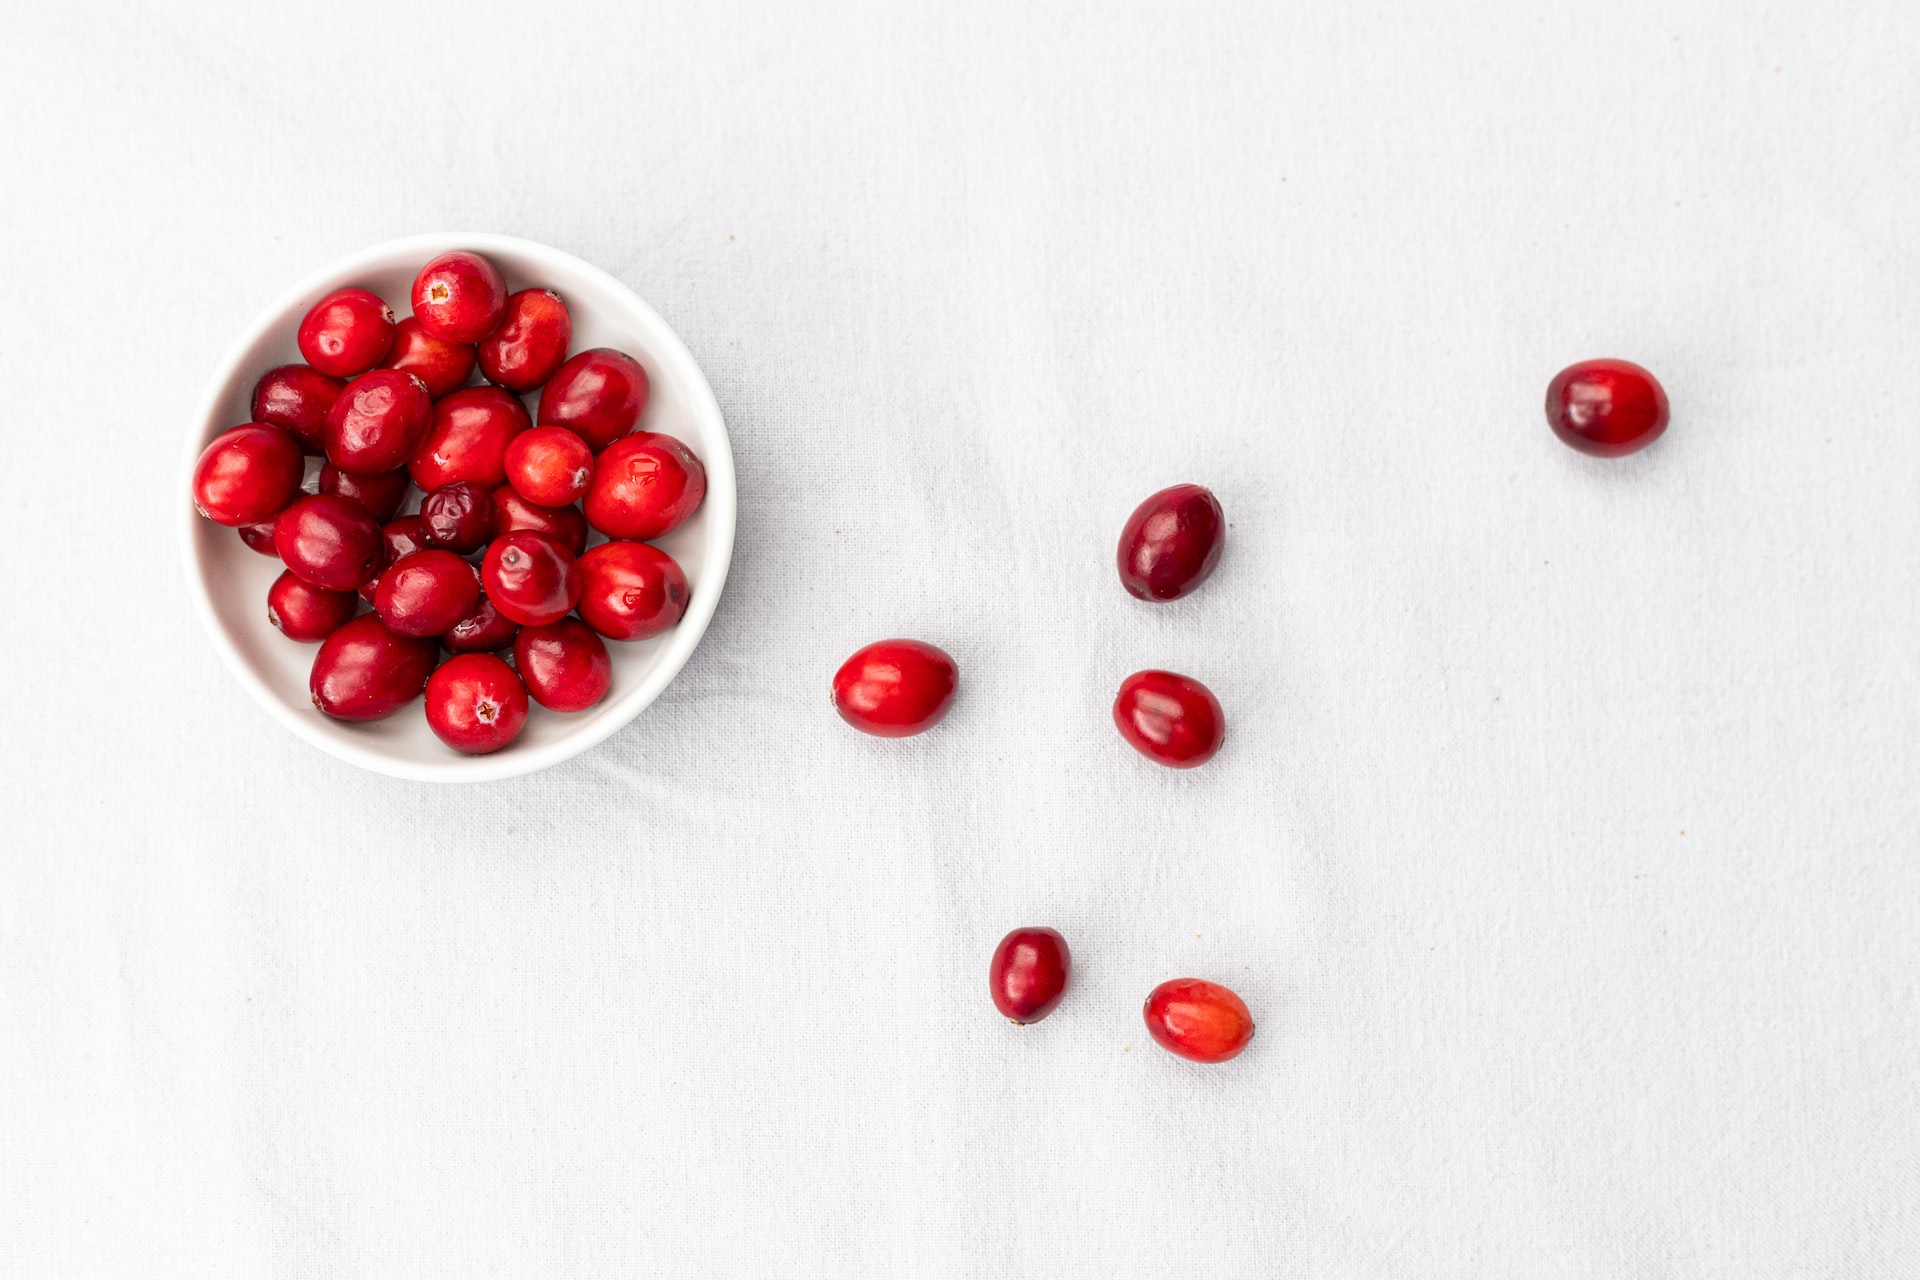 The tart and tasty world of cranberries: Nutrition, uses, and fun facts